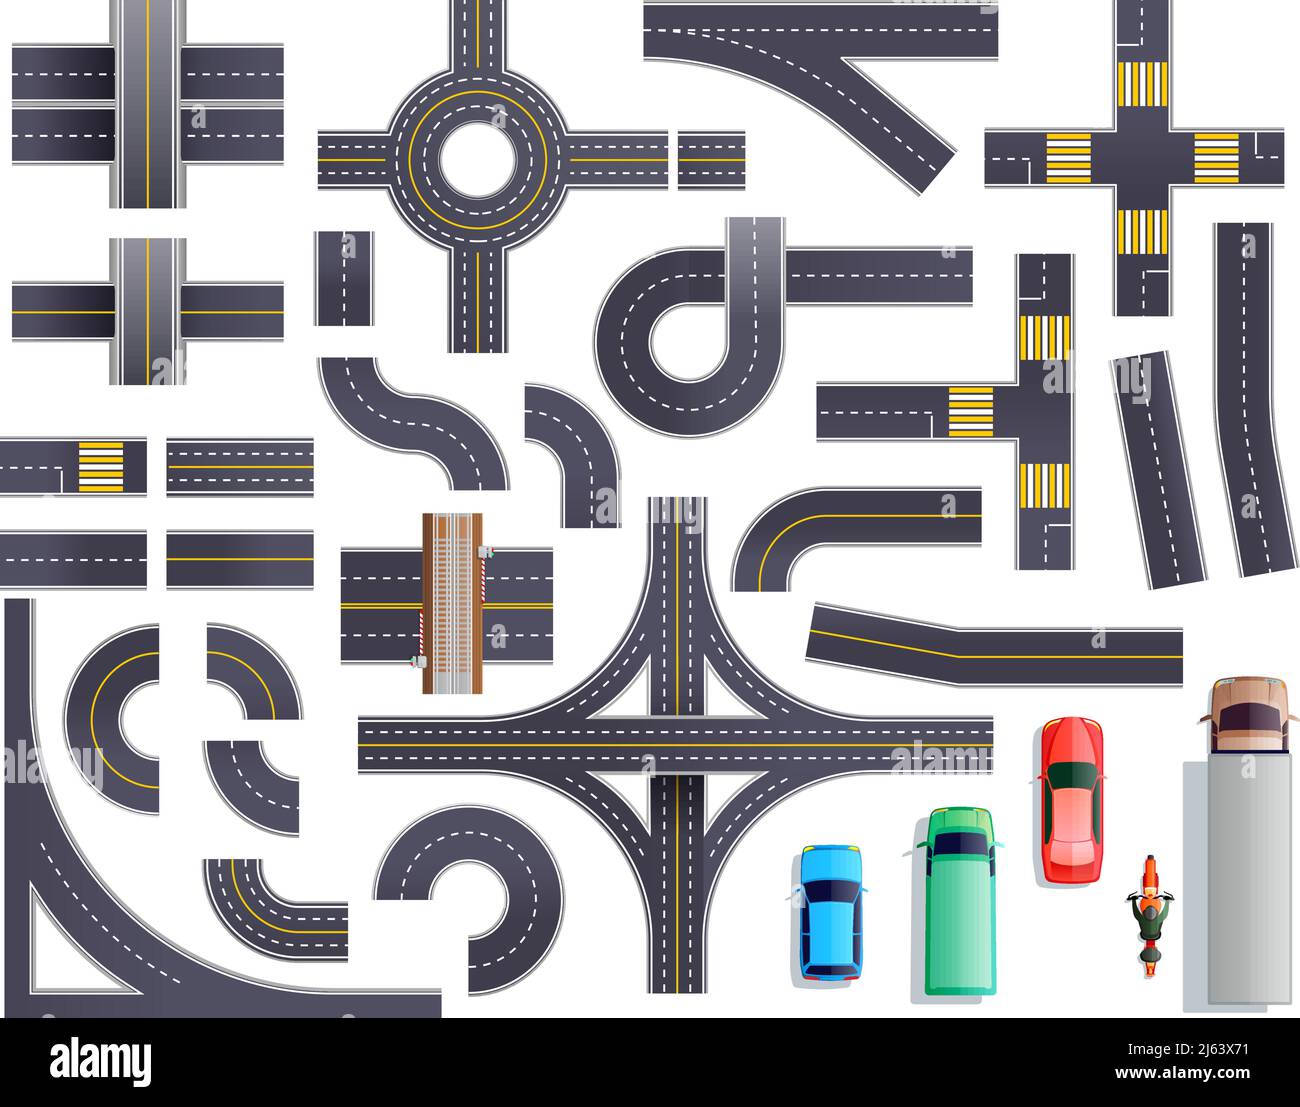 Set of road parts with roadside and marking including intersections, junctions, crosswalks, bridges, vehicles isolated vector illustration Stock Vector